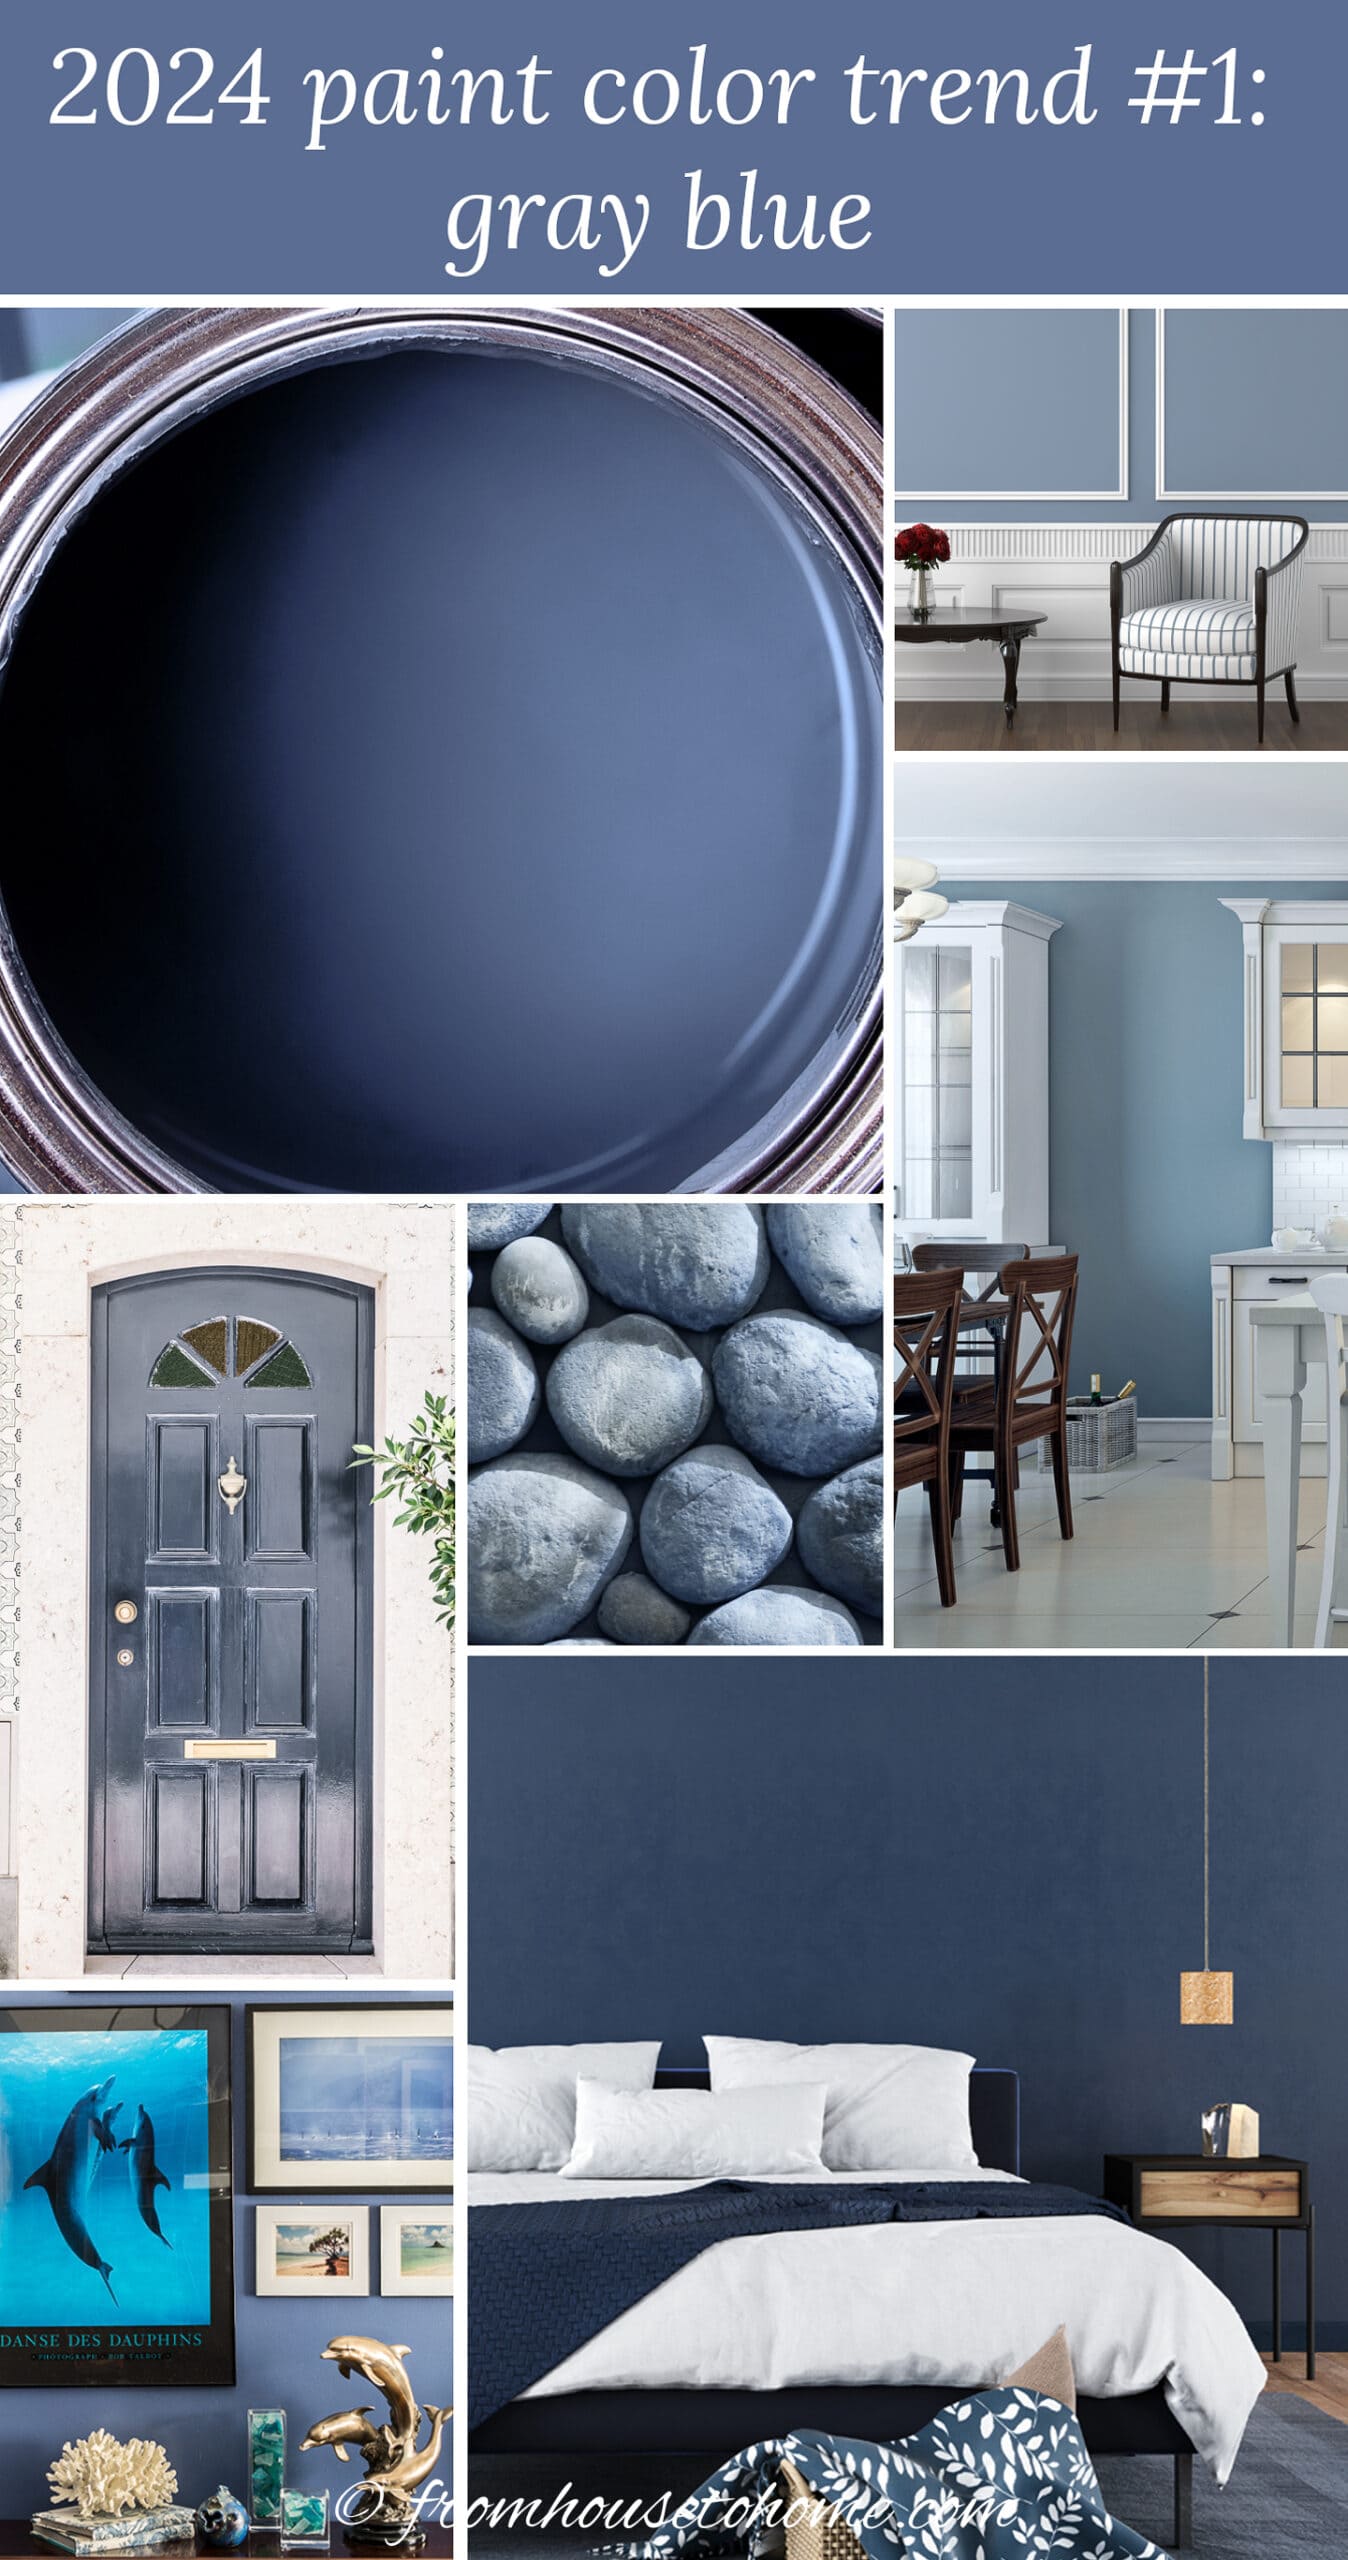 collage of gray blue items representing 2024 paint color trends